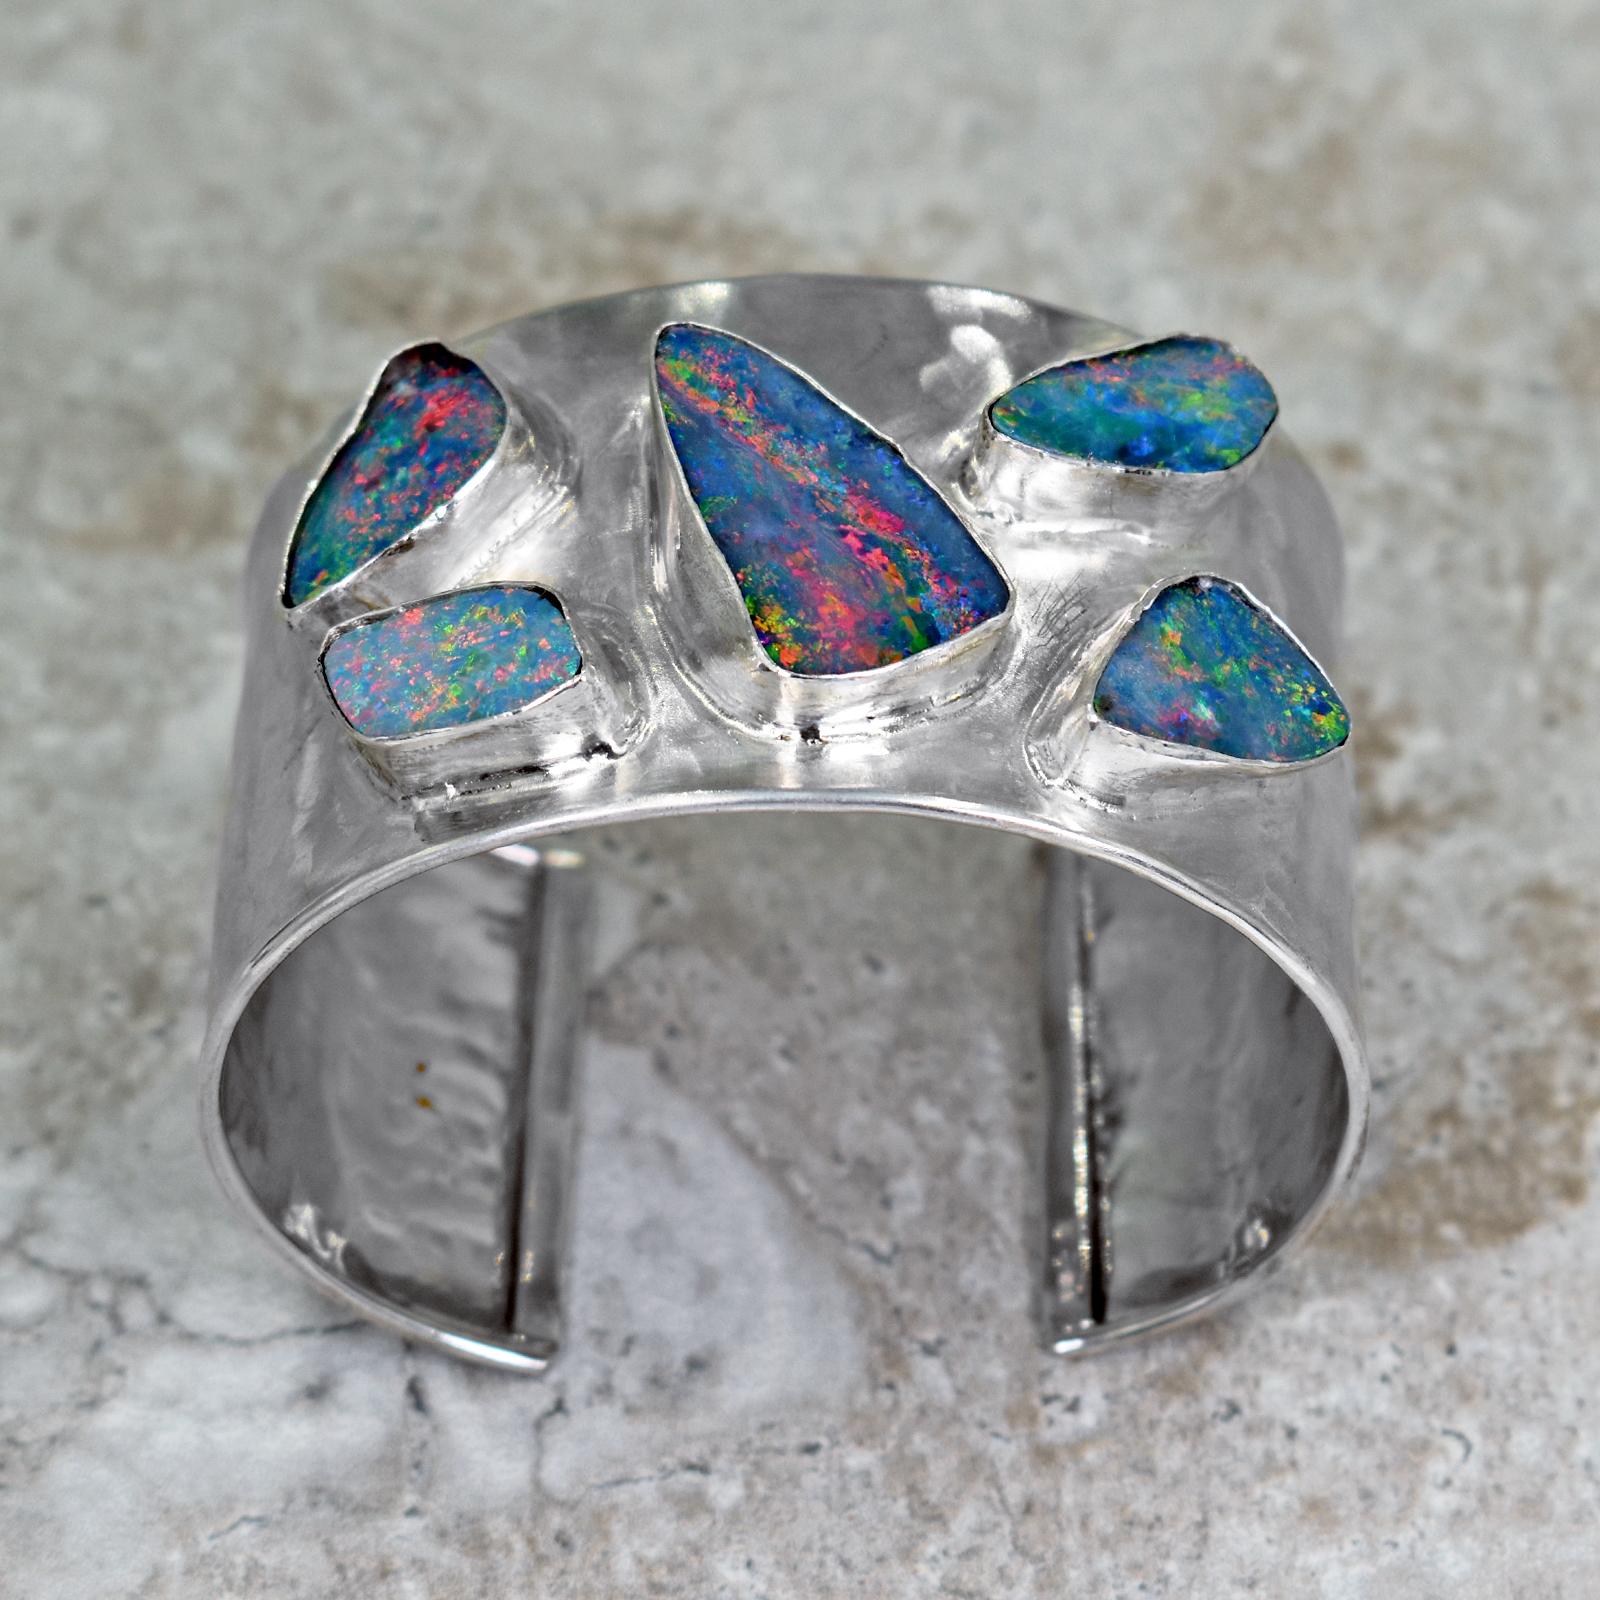 Five, gorgeous Australian Boulder Opals set in a hammered, sterling silver wide cuff bracelet with a brushed finish. Silver cuff is 1.5 inches wide. Inside of bracelet is 2.32 inches in width and bracelet opening is 1.07 inches wide, but is